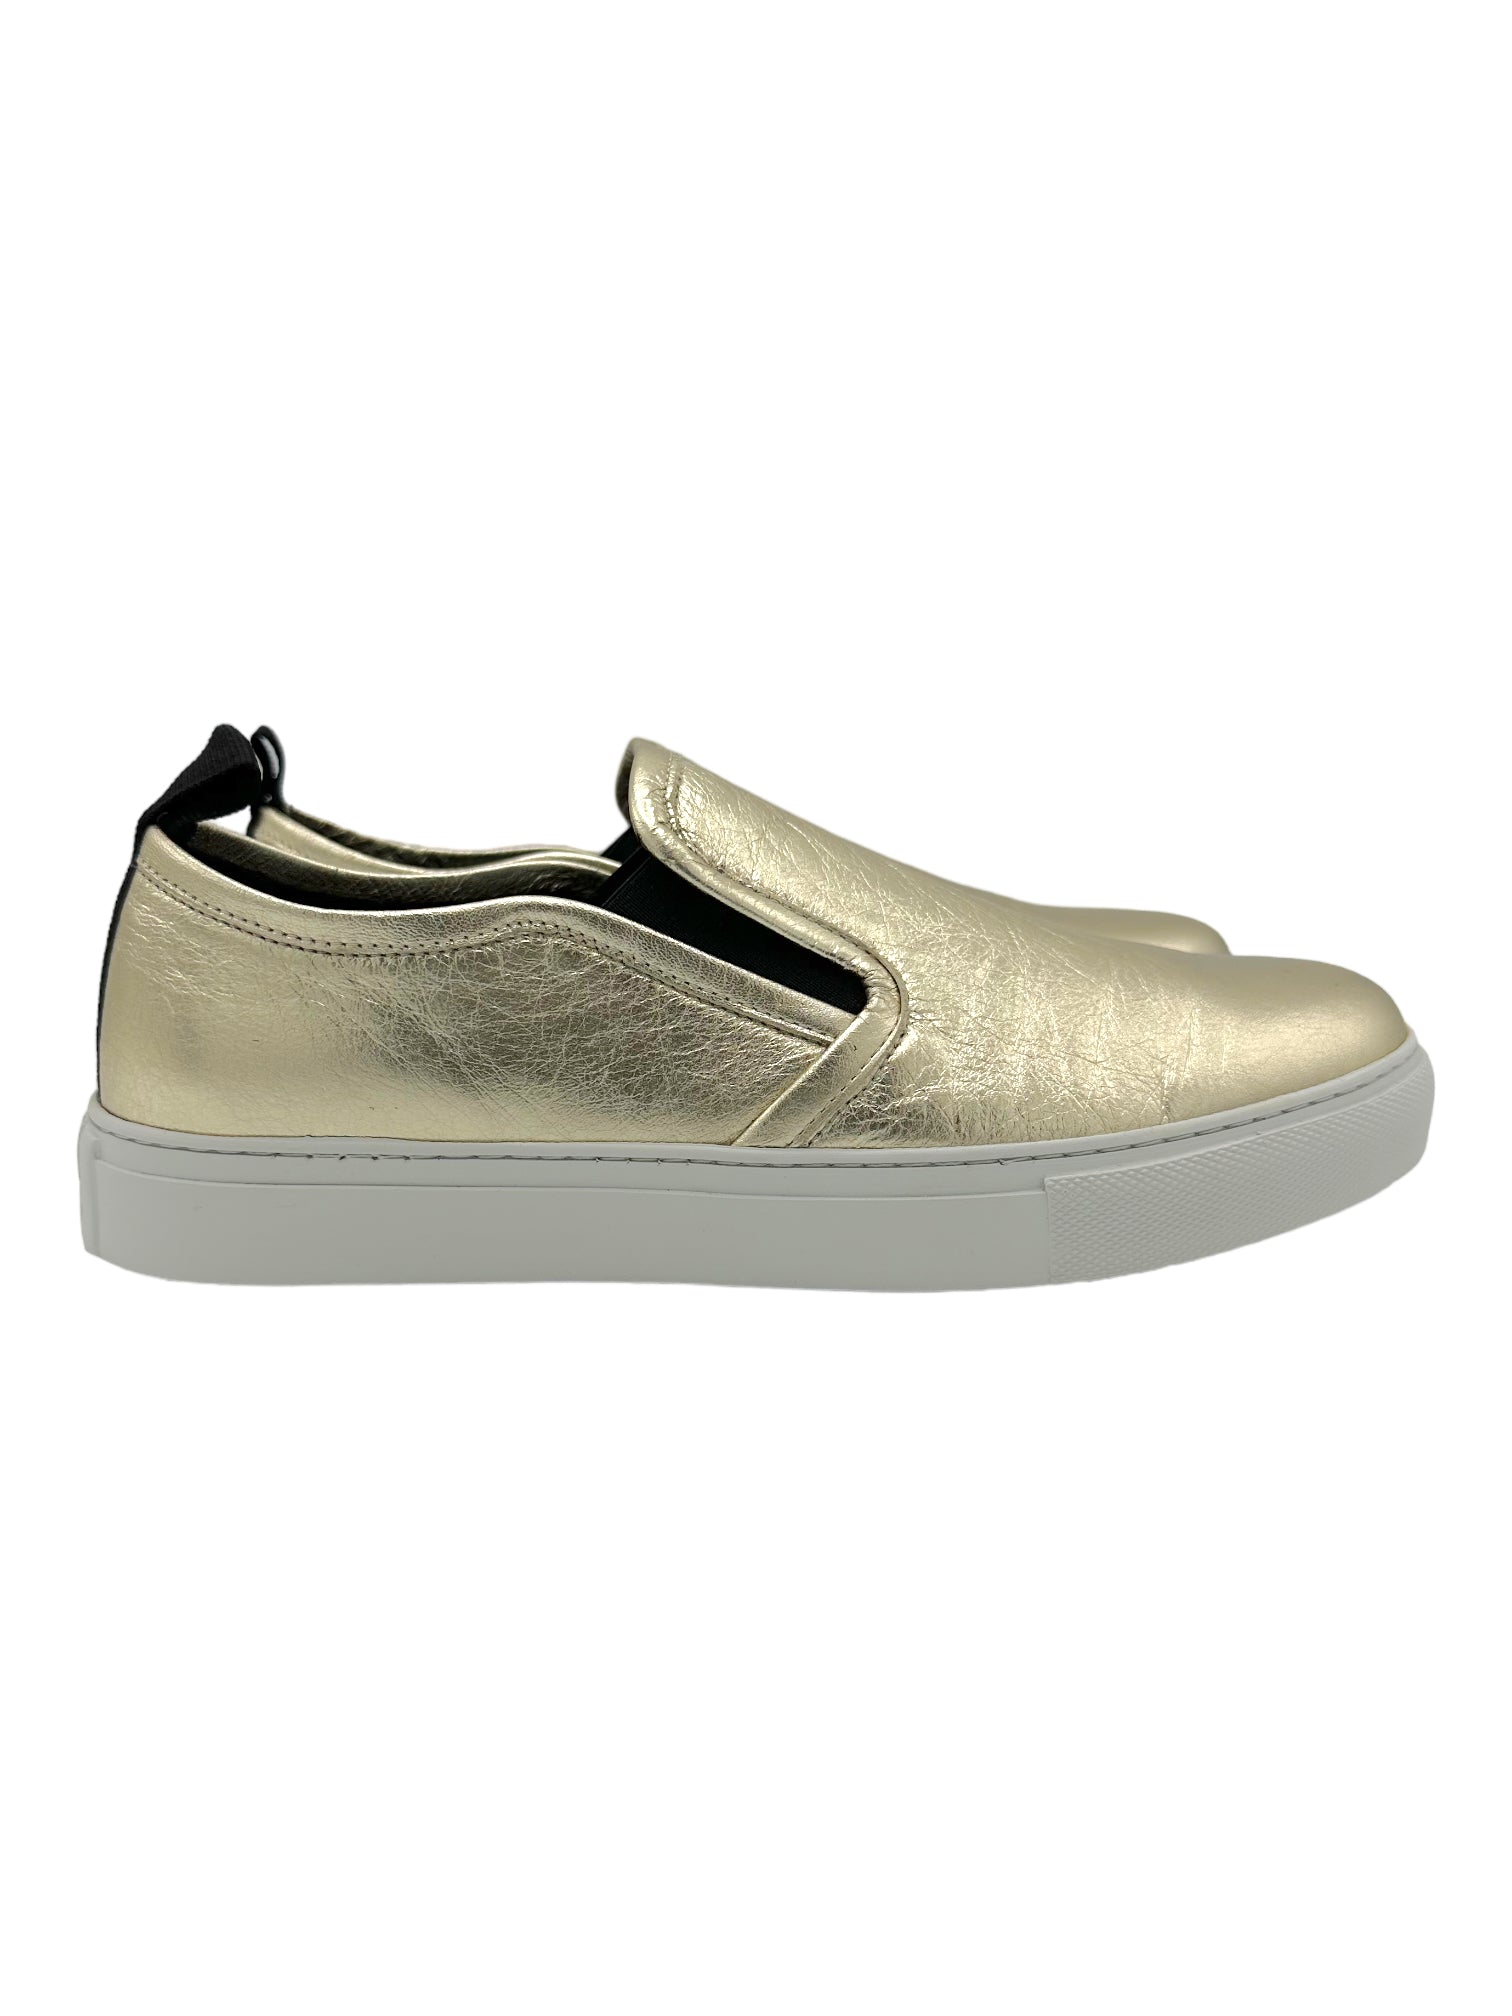 Alexander McQueen Gold & White Slip On Sneaker - Genuine Design Luxury Consignment for Men. New & Pre-Owned Clothing, Shoes, & Accessories. Calgary, Canada